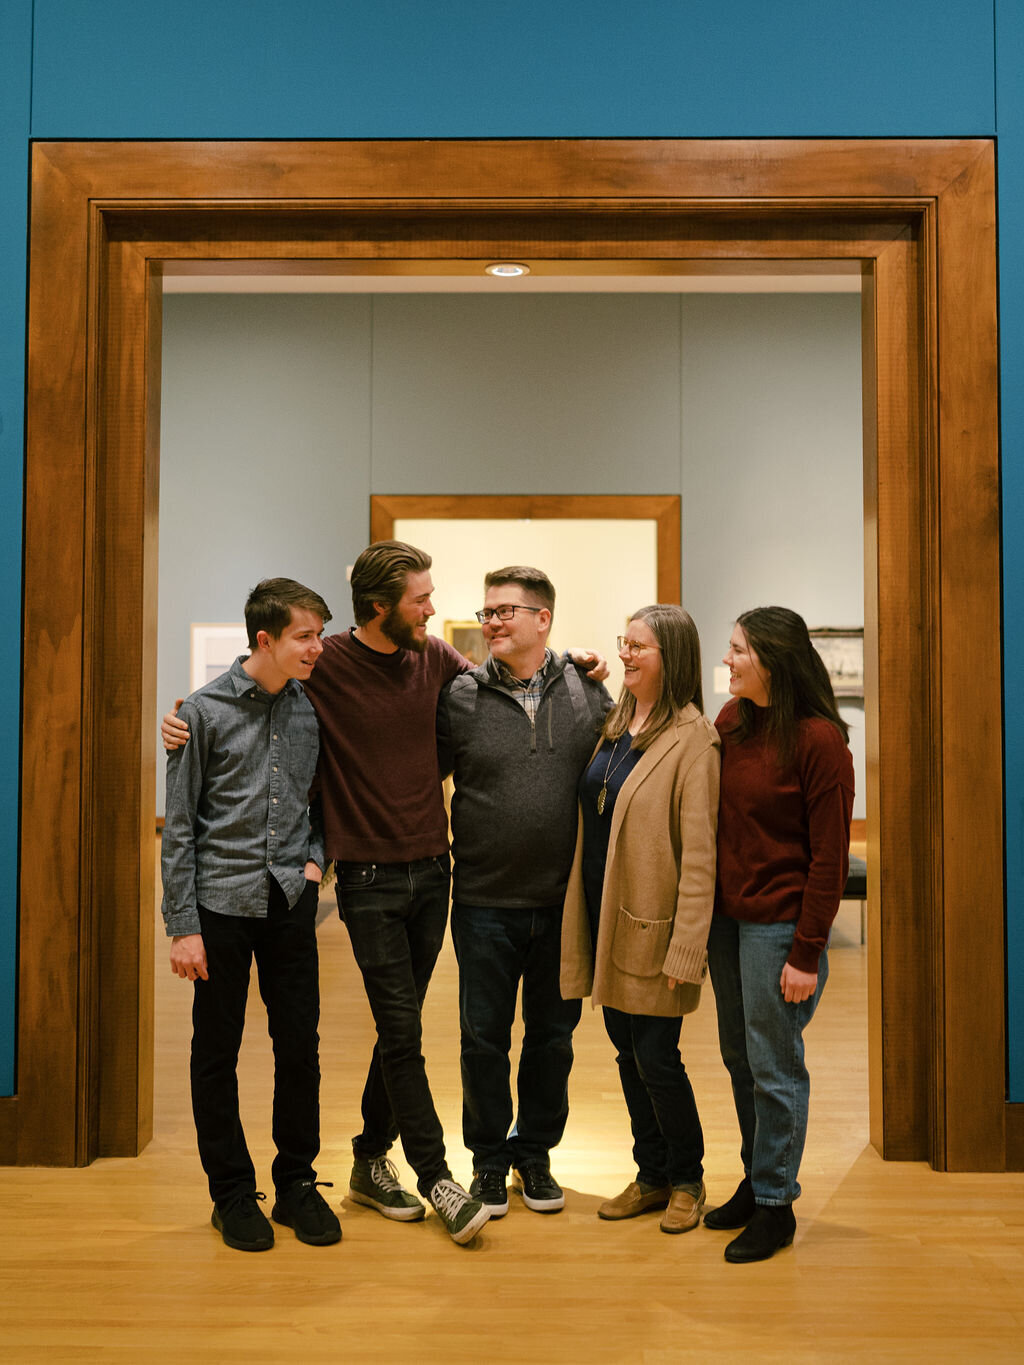 family portraits at art museum-13